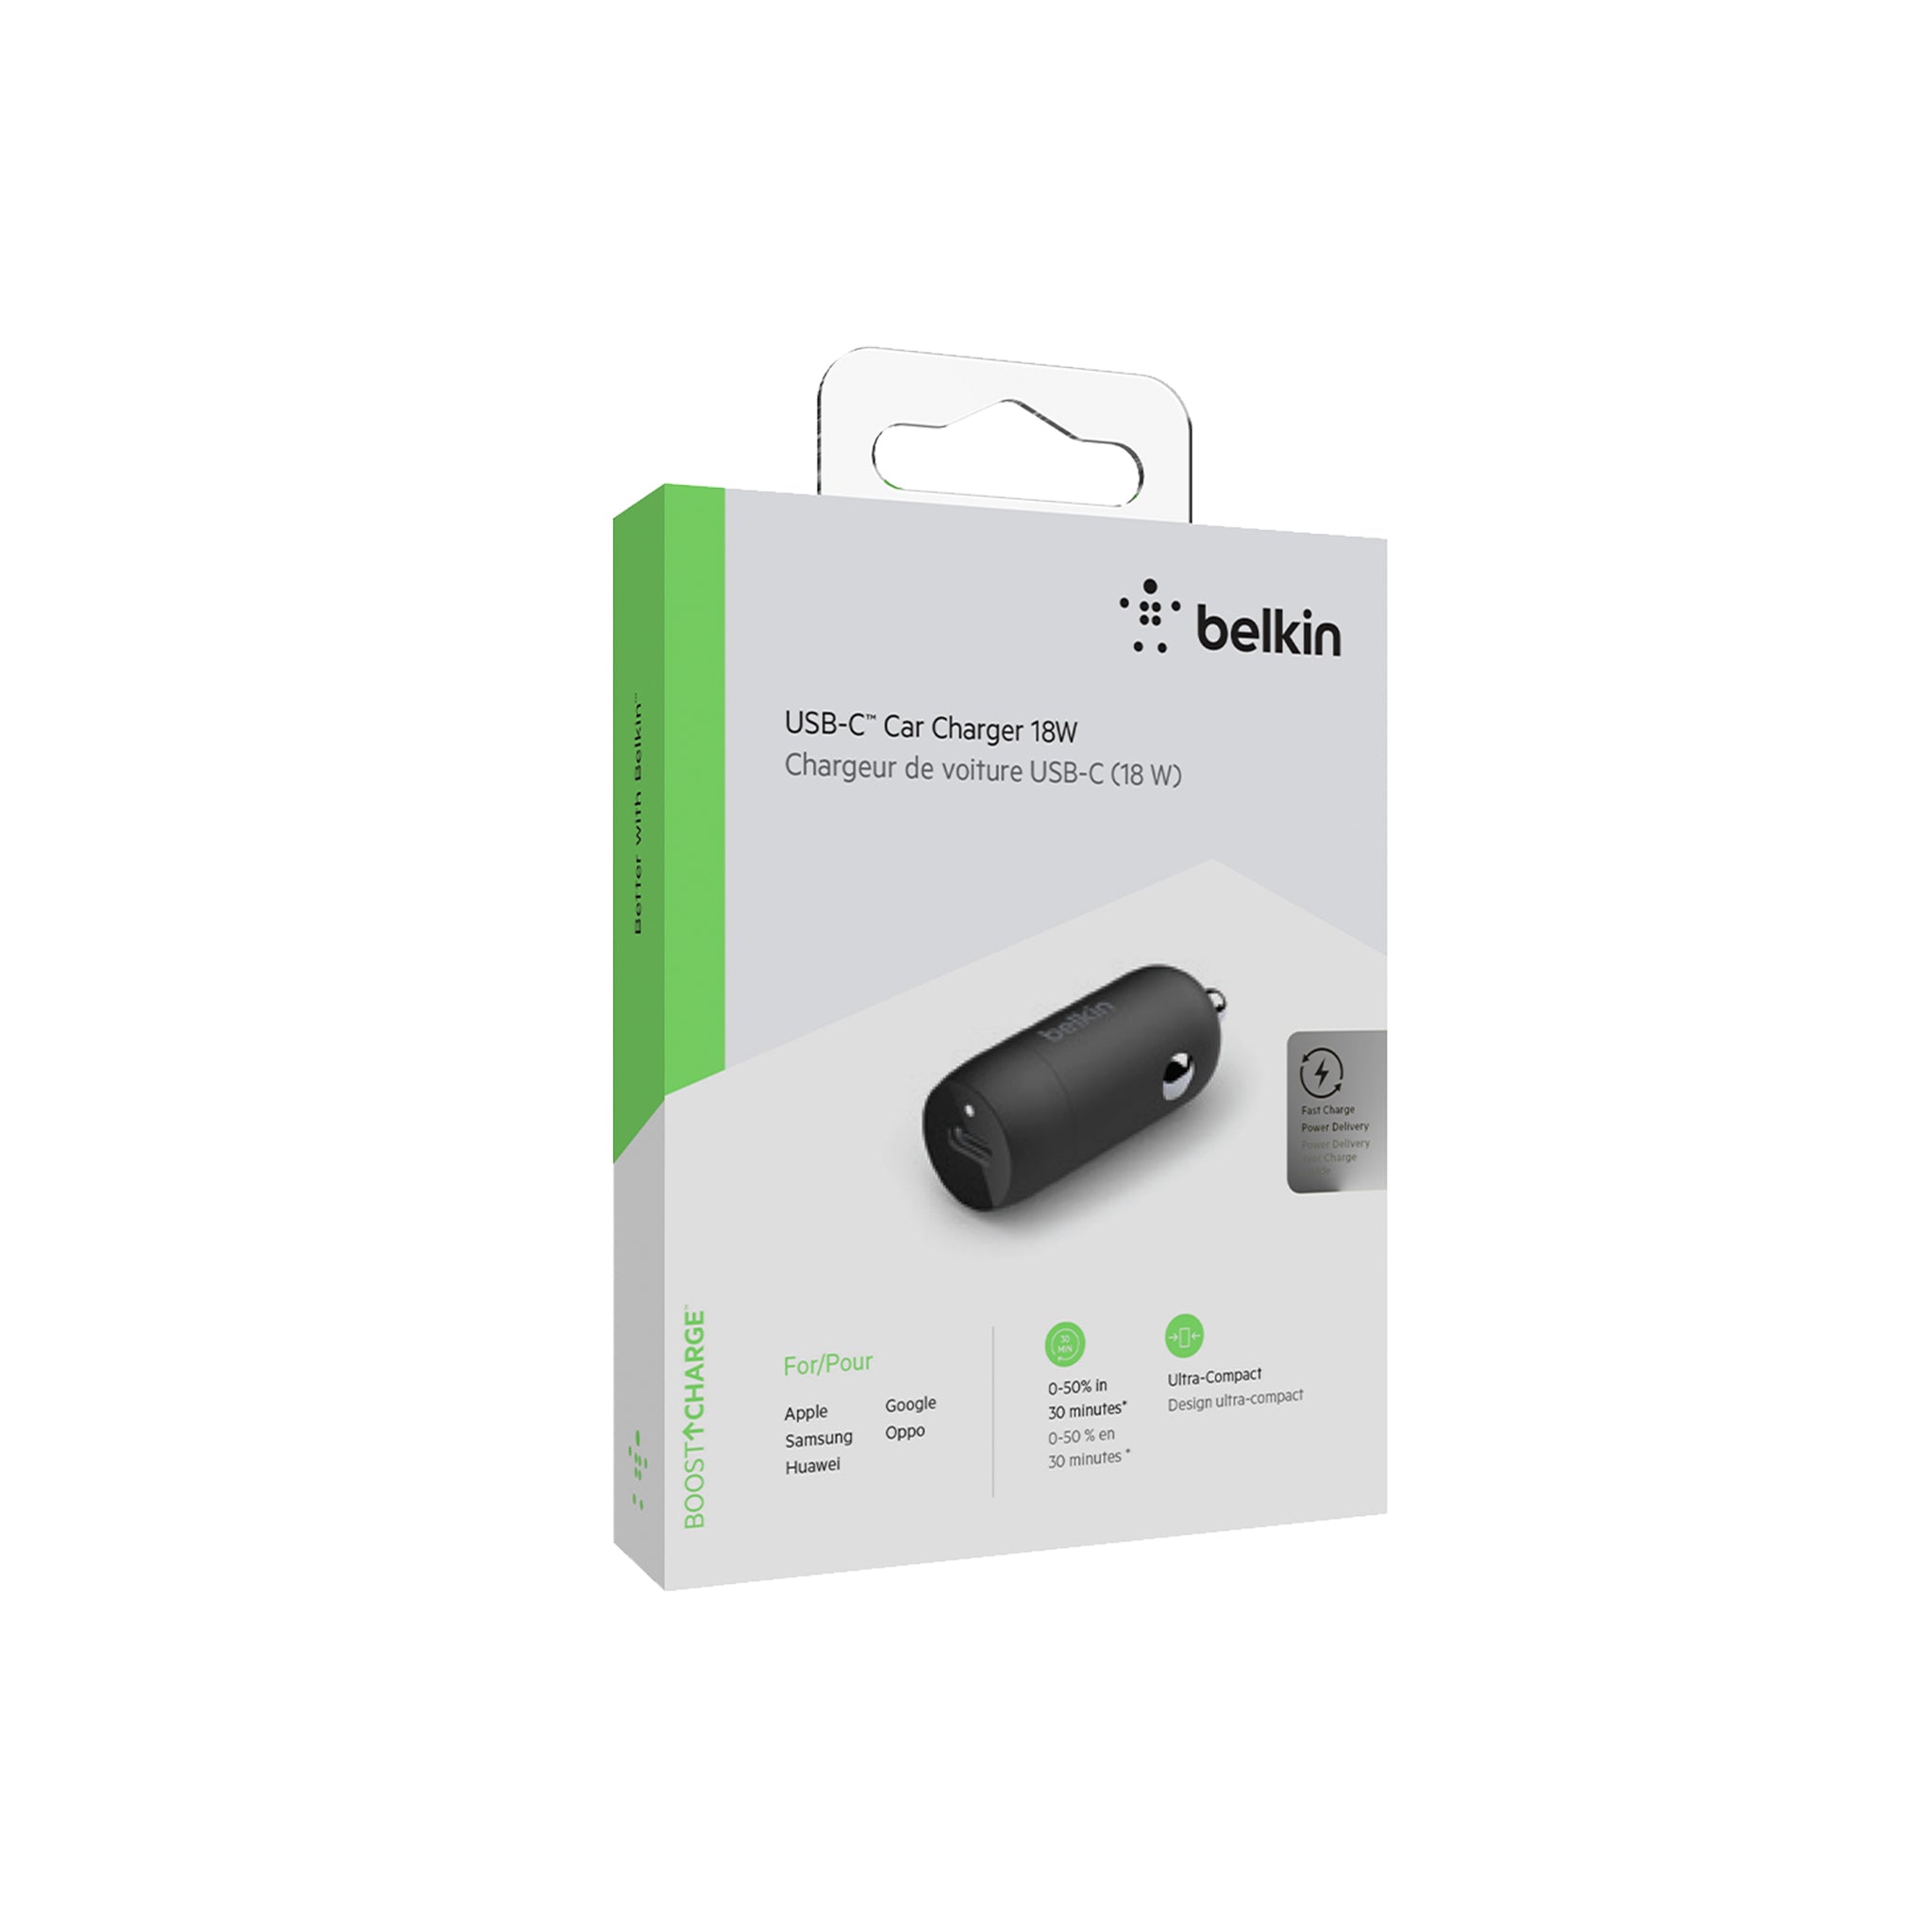 Belkin - Usb C Power Delivery Car Charger 18w - Black